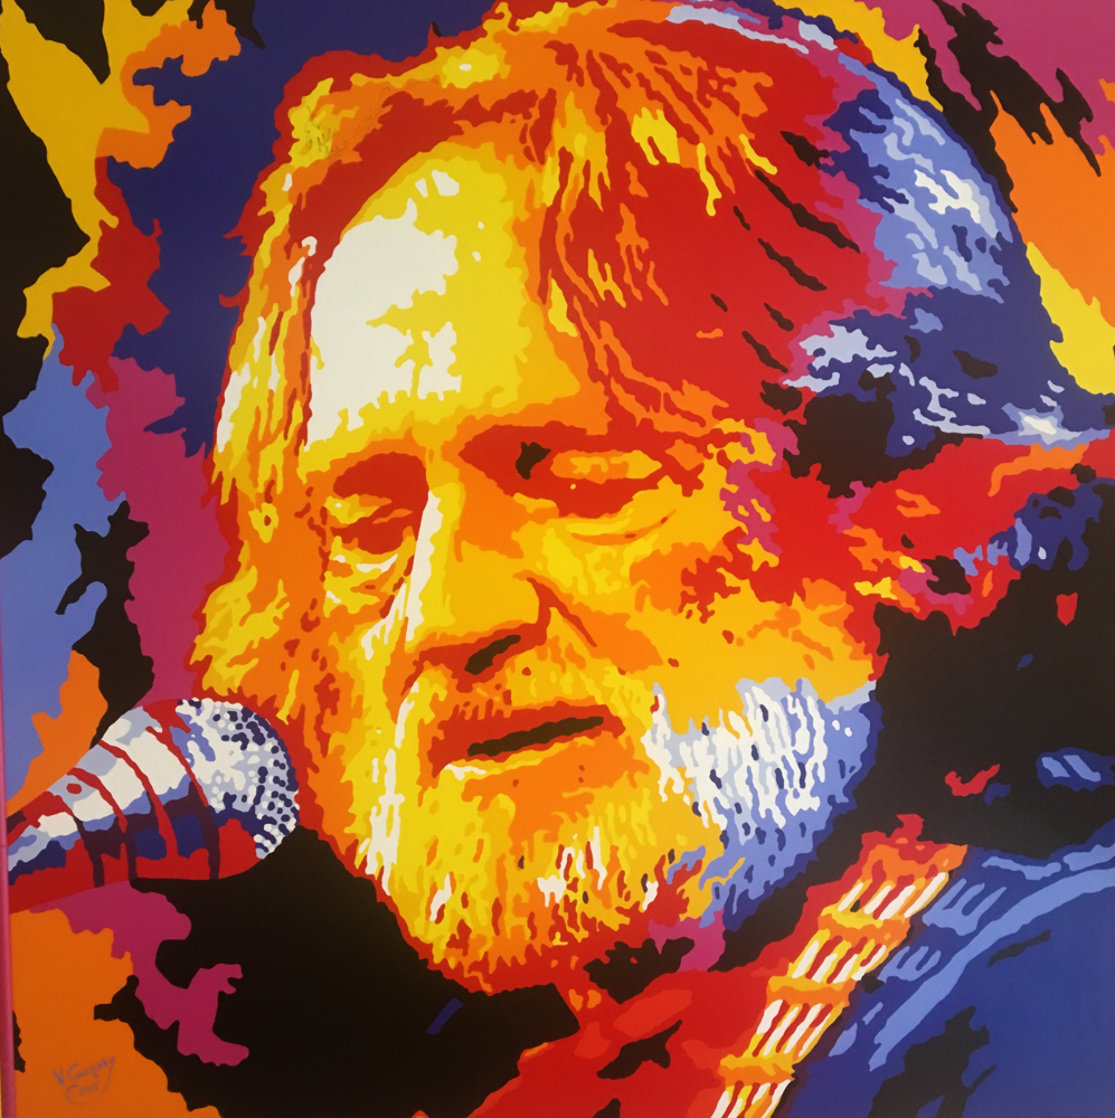 Willie Nelson 2005 52x52 HS by Willie Original Painting by Vladimir Gorsky